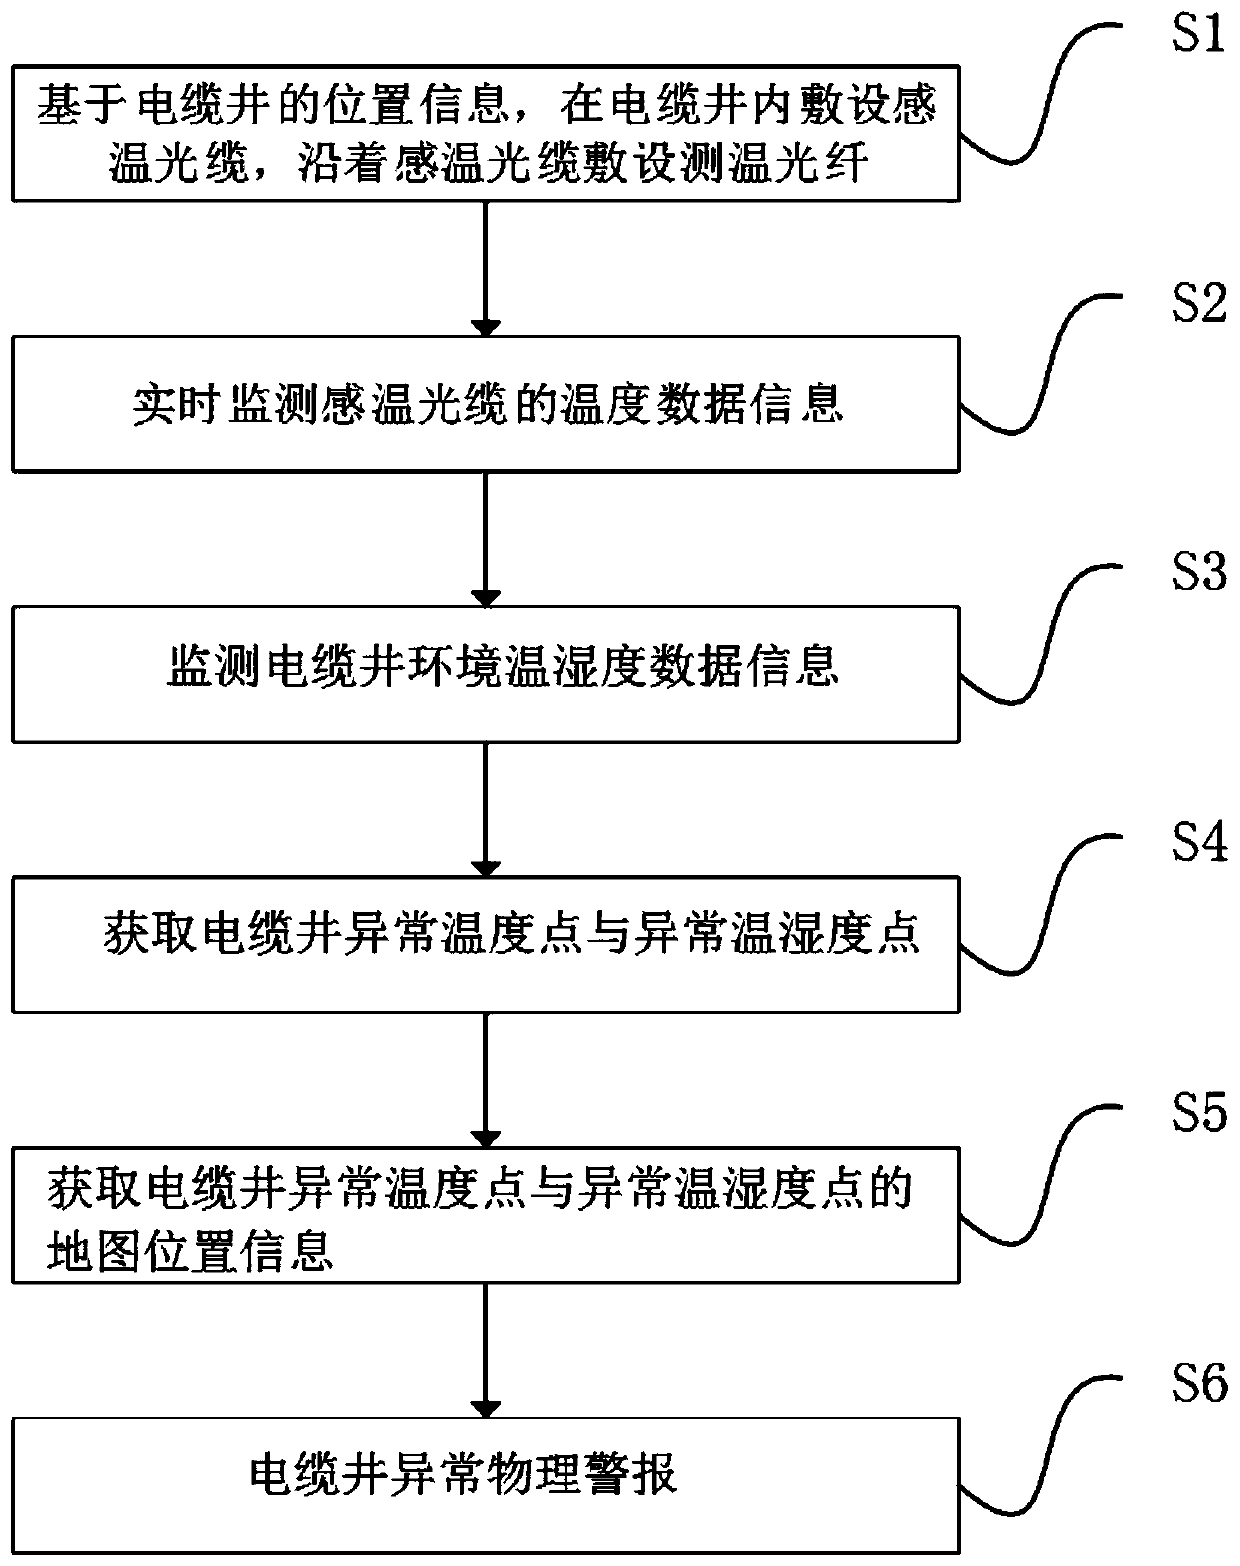 Cable well environment monitoring method, system and device based on Internet of Things